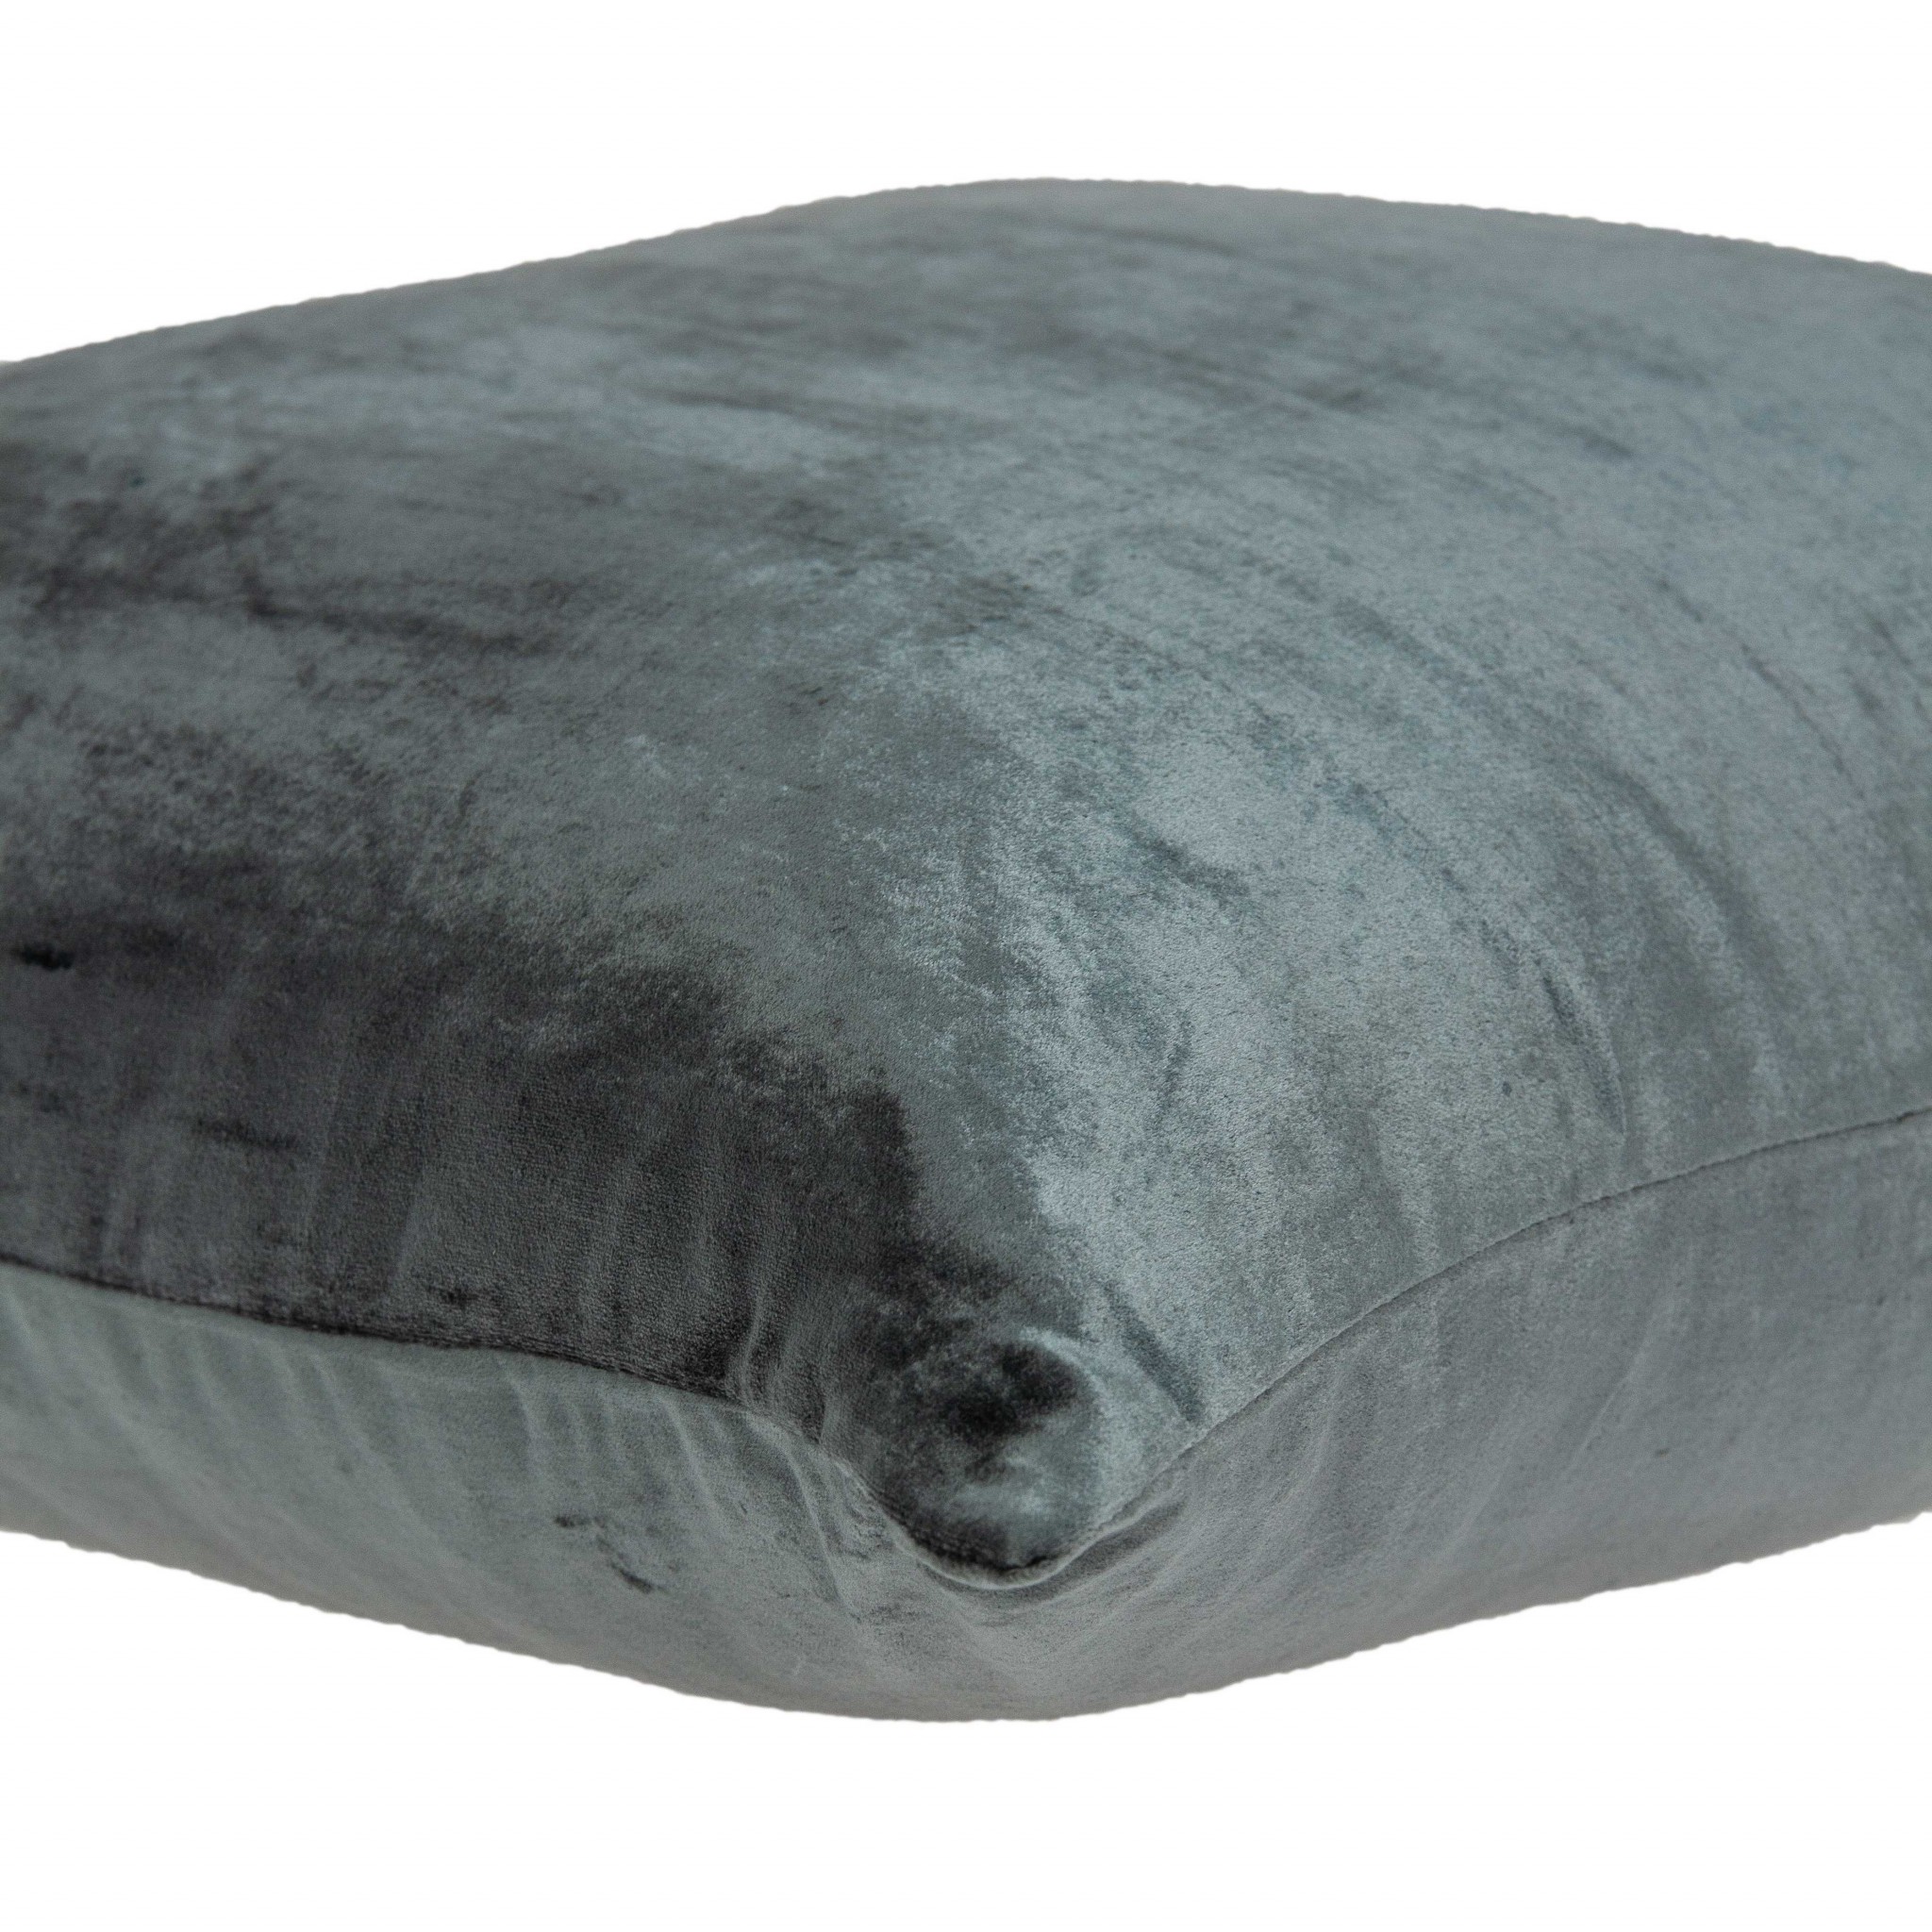 18" x 7" x 18" Transitional Charcoal Solid Pillow Cover With Down Insert